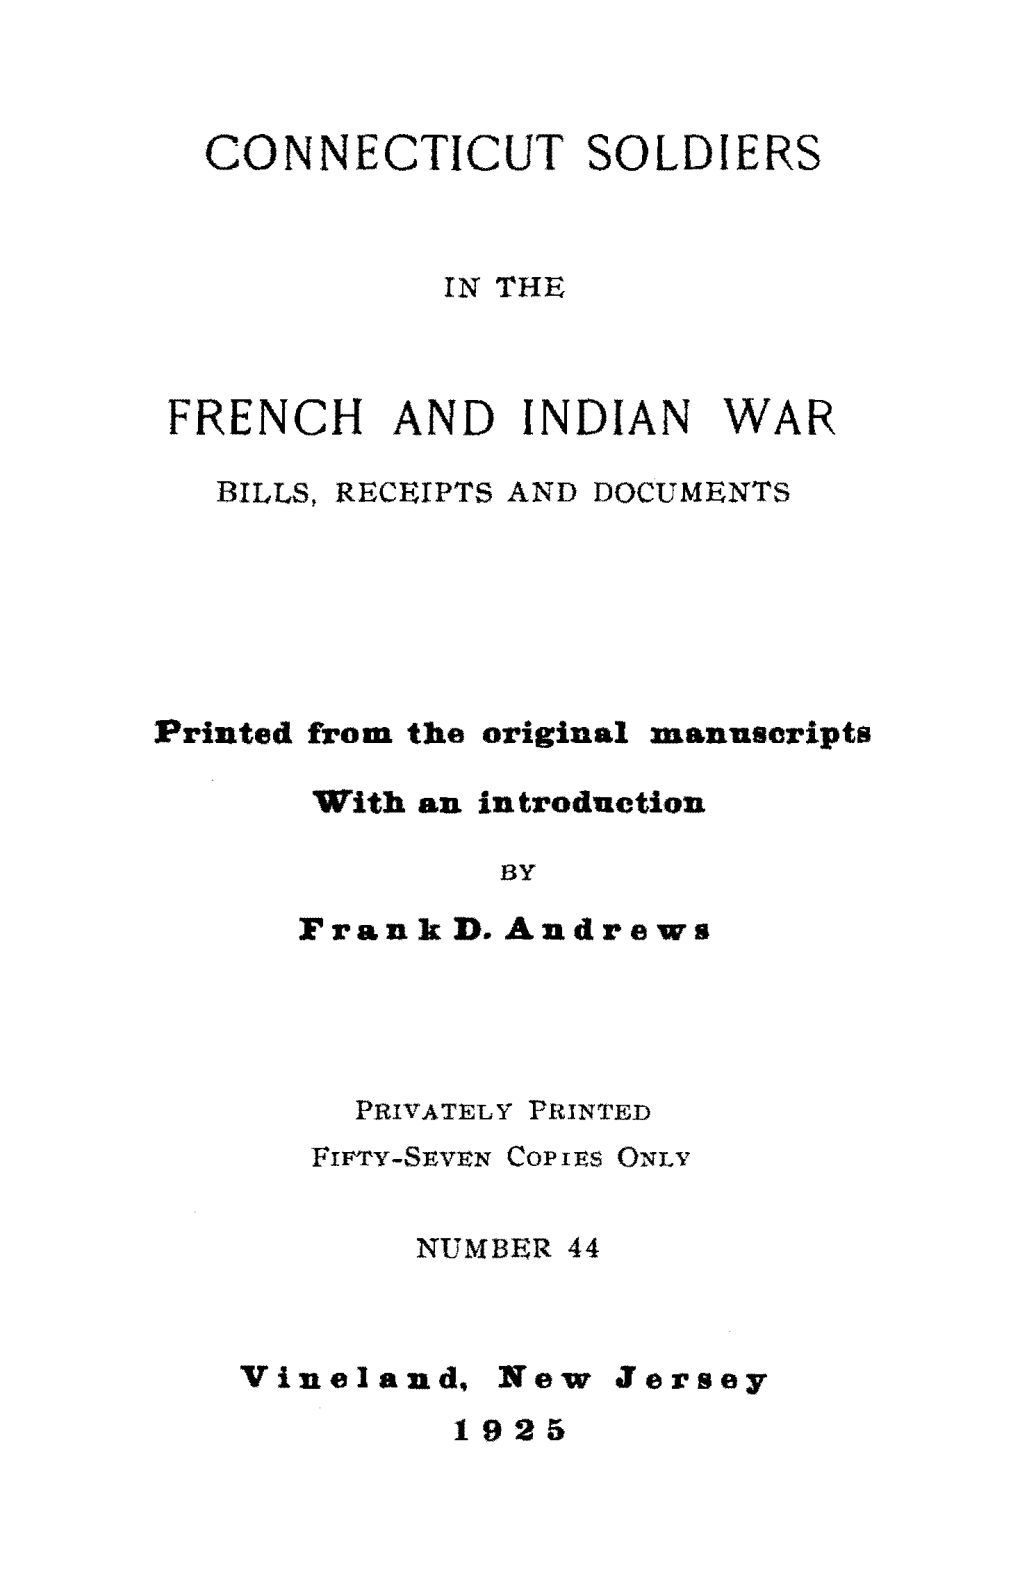 Connecticut Soldiers French and Indian